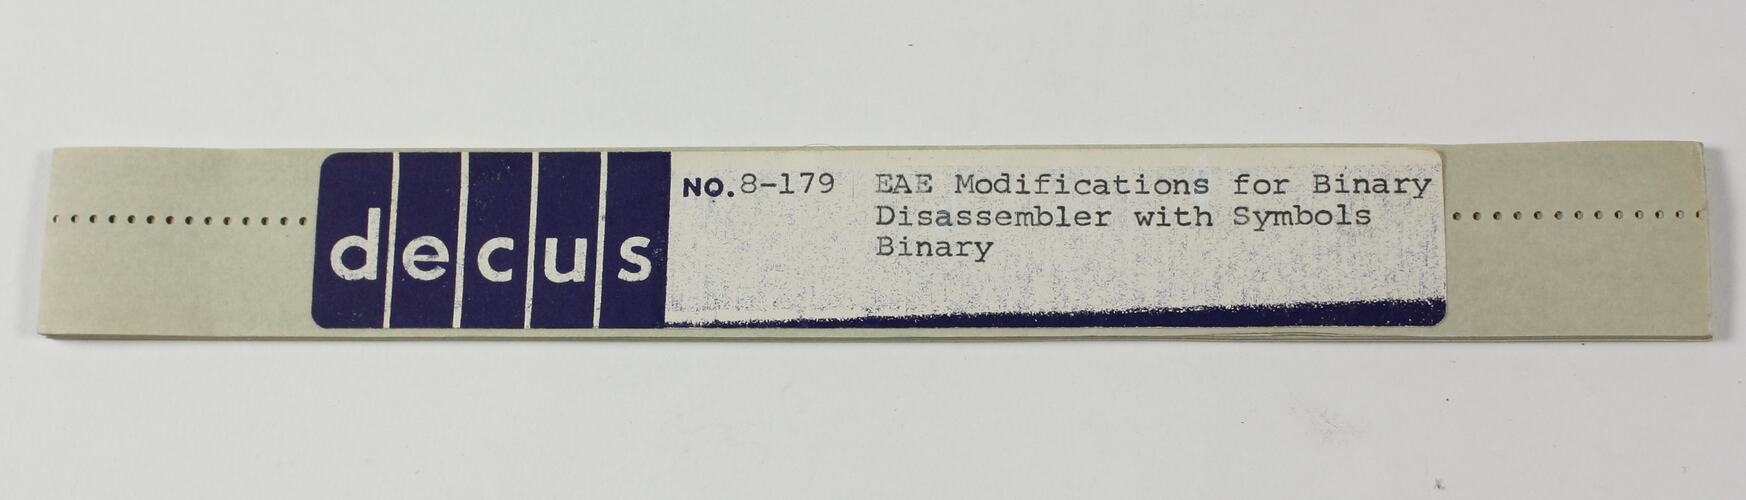 Paper Tape - DECUS, '8-179 EAE Modifications for Binary Disassembler with Symbols, Binary'